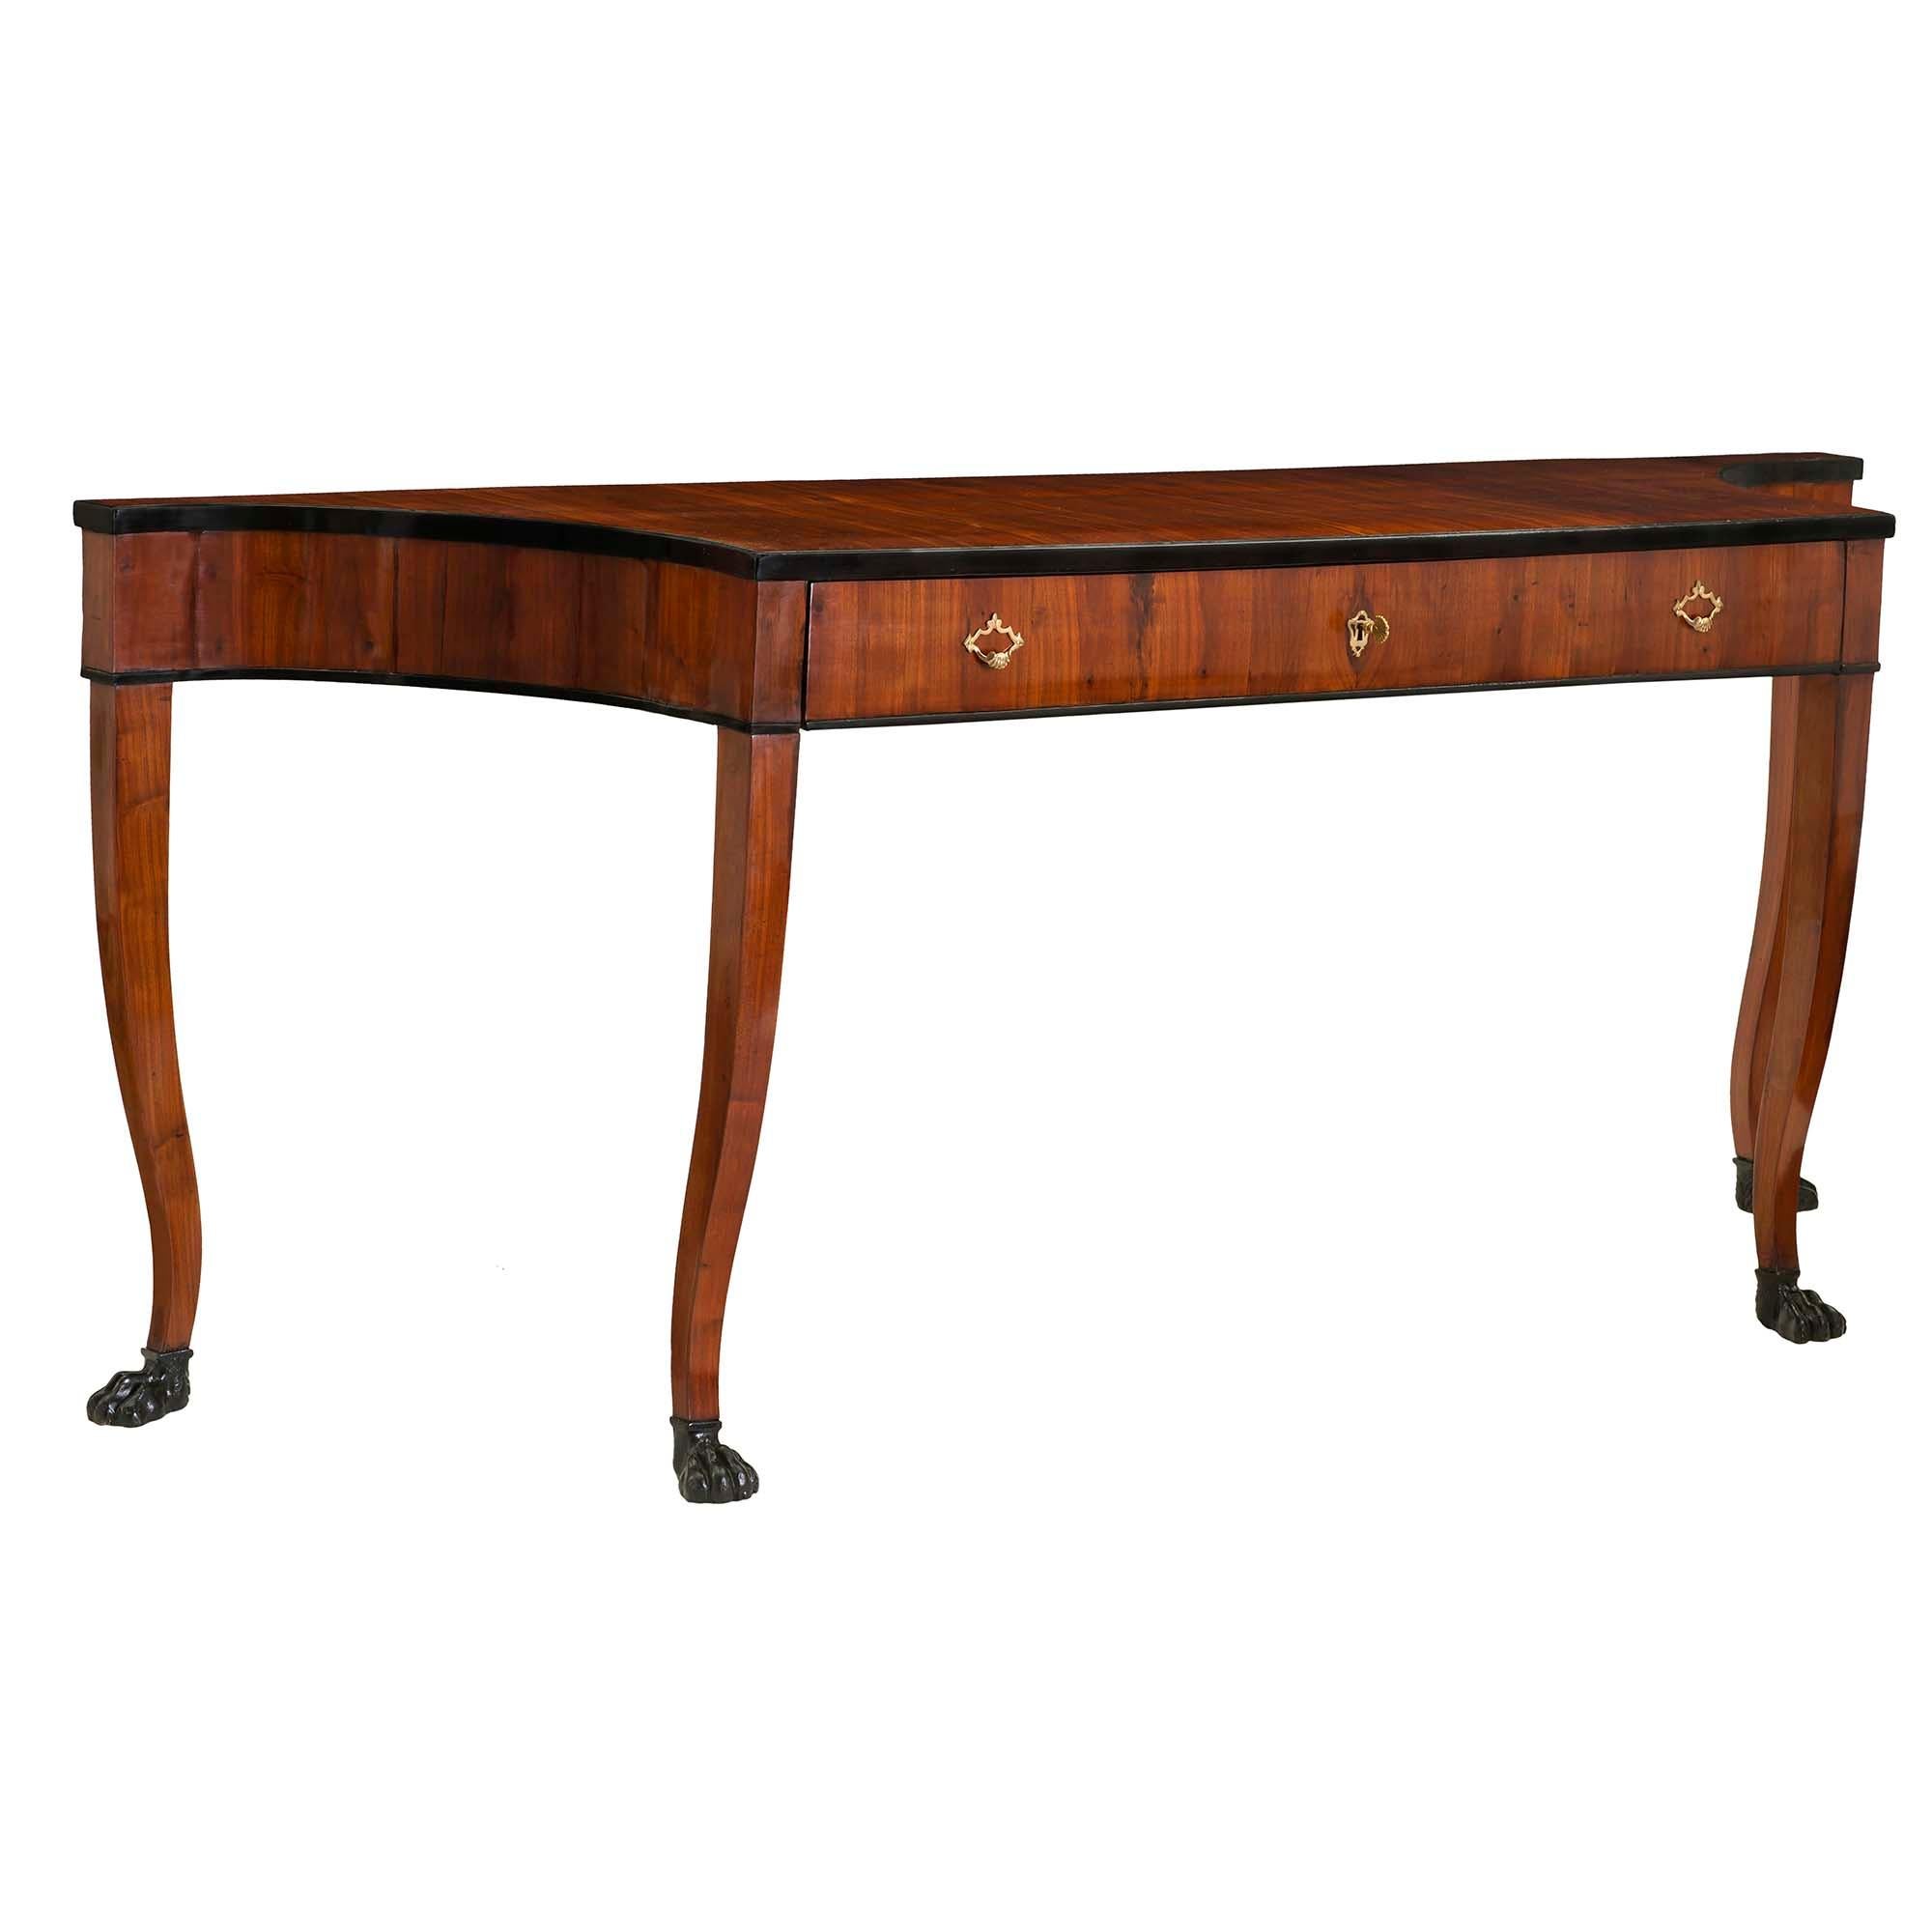 Italian Early 19th Century Neoclassical Style Mahogany and Fruitwood Console In Good Condition For Sale In West Palm Beach, FL